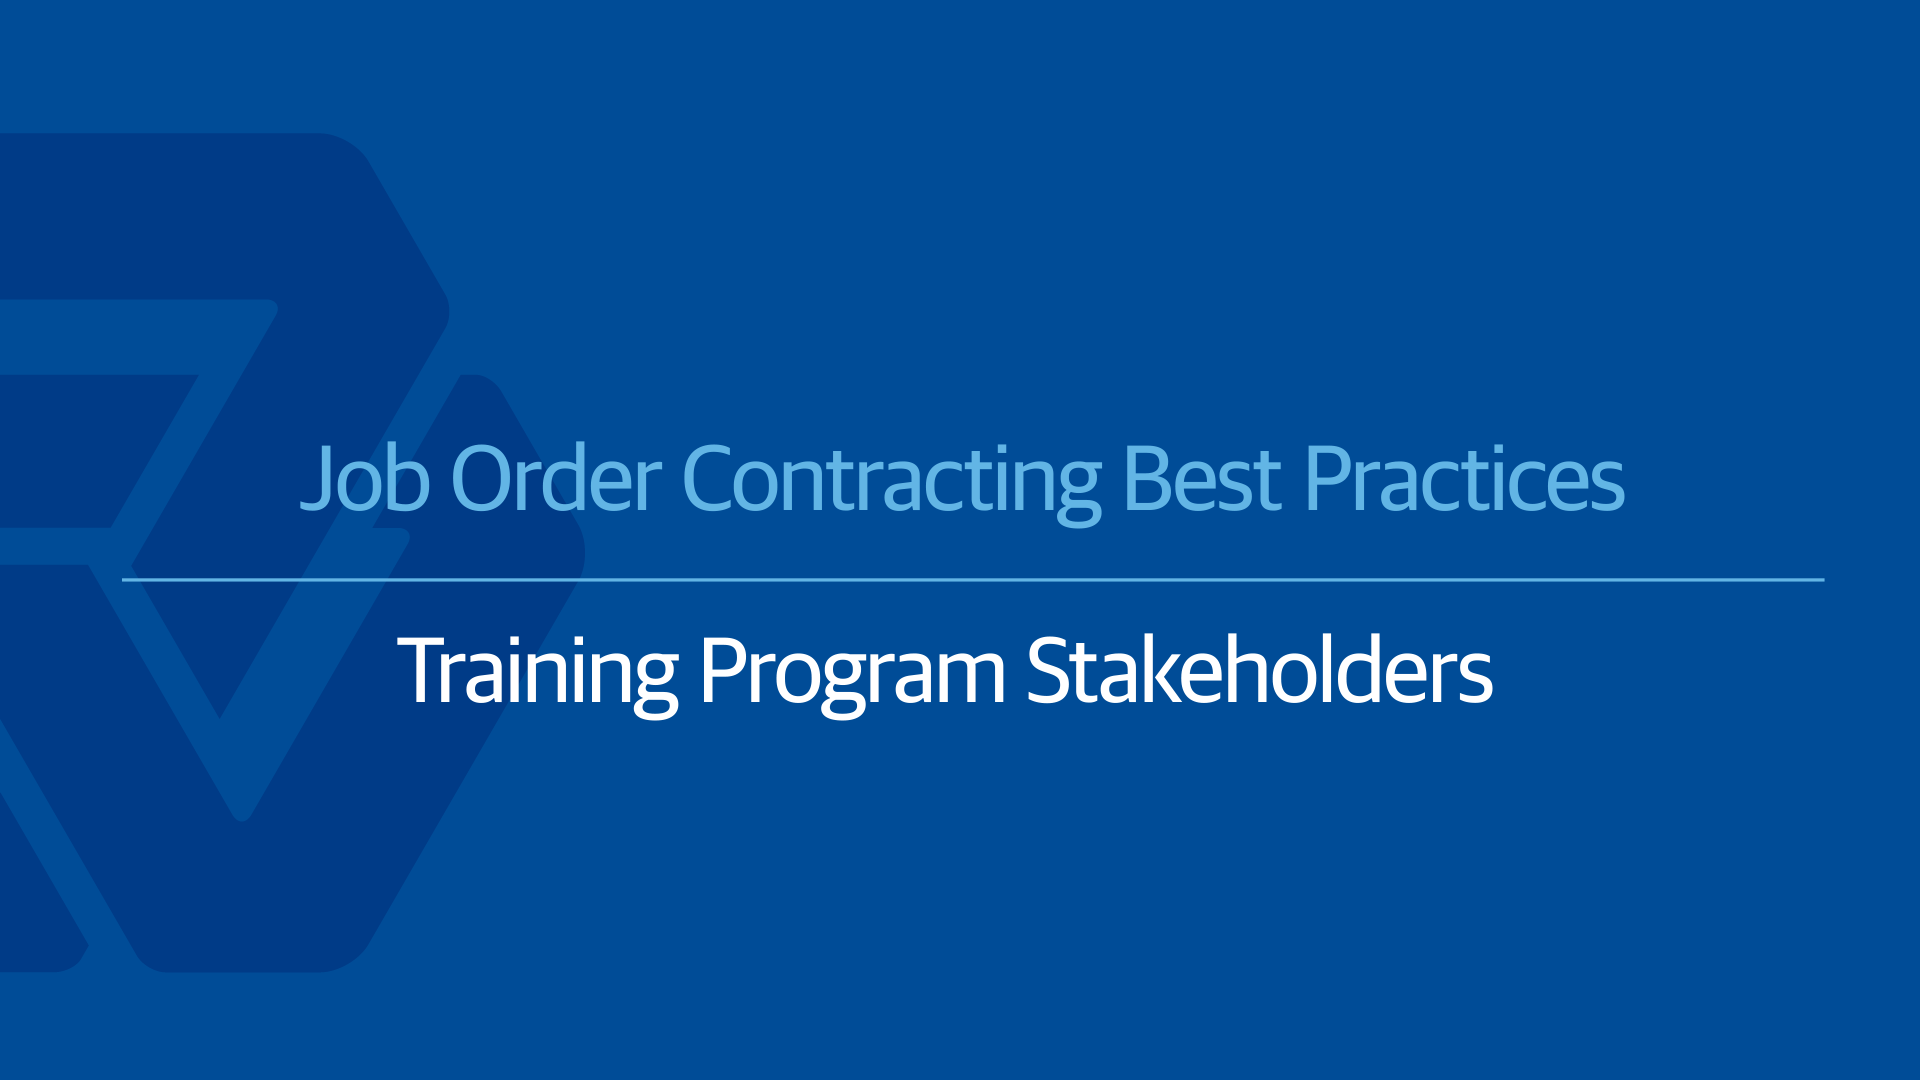 Job Order Contracting Best Practices: A Quality JOC Education